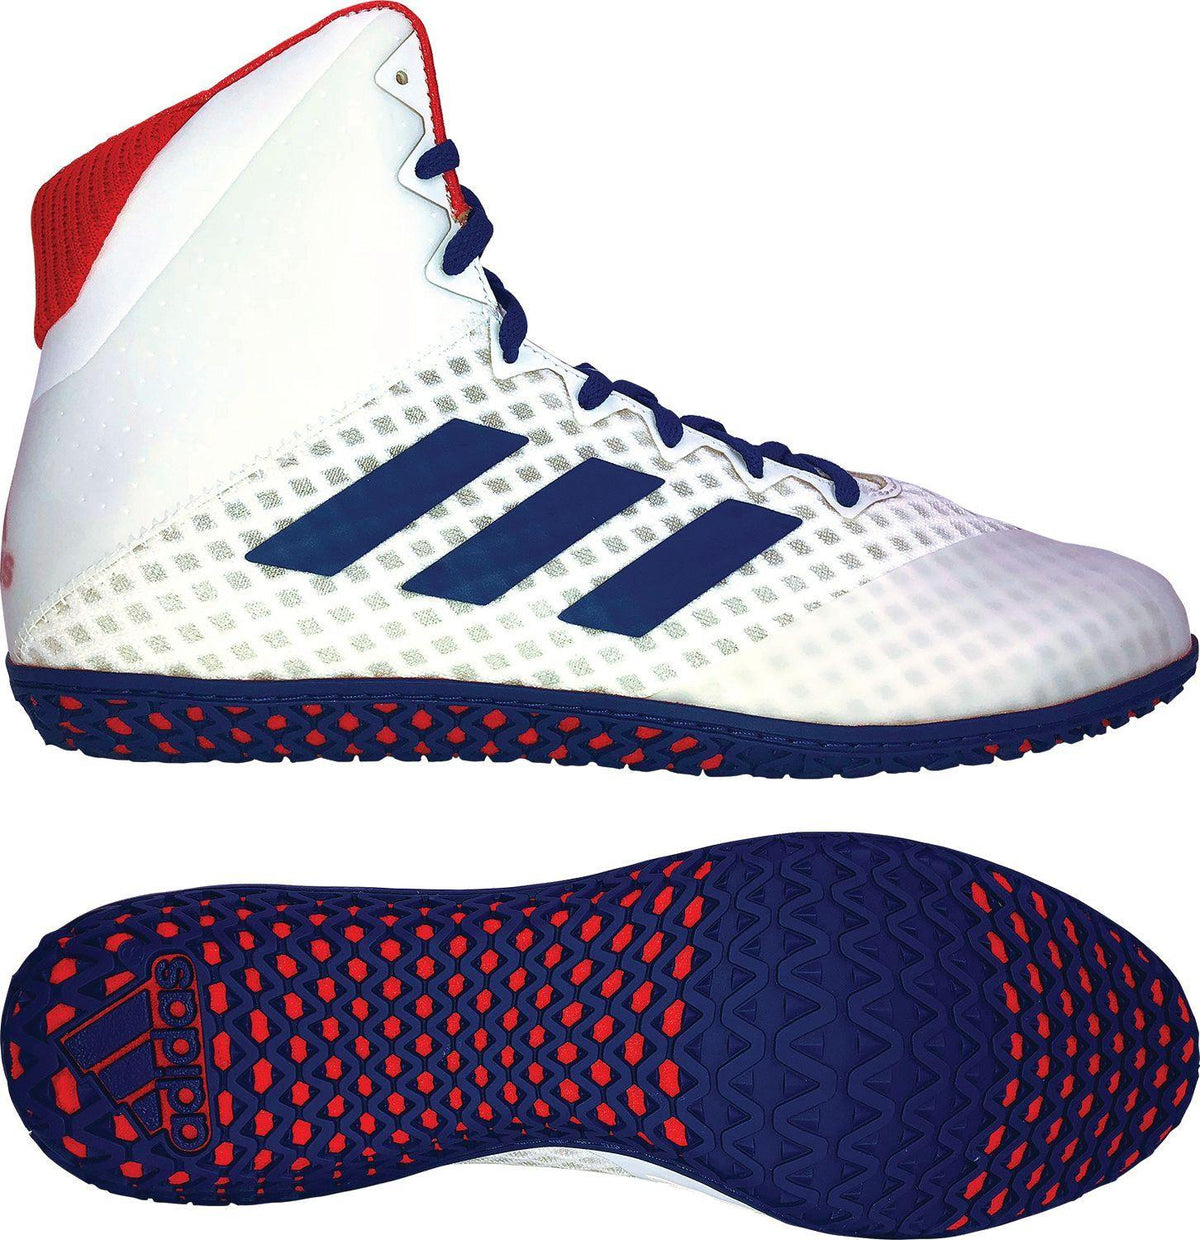 AdidasWrestling on X: The Mat Wizard 4. Breathable with groundbreaking  grip. Equipped with medial and lateral drive zones providing consistent  surface contact even in extreme angles. #wrestling #adidaswrestling  #matwizard4  / X